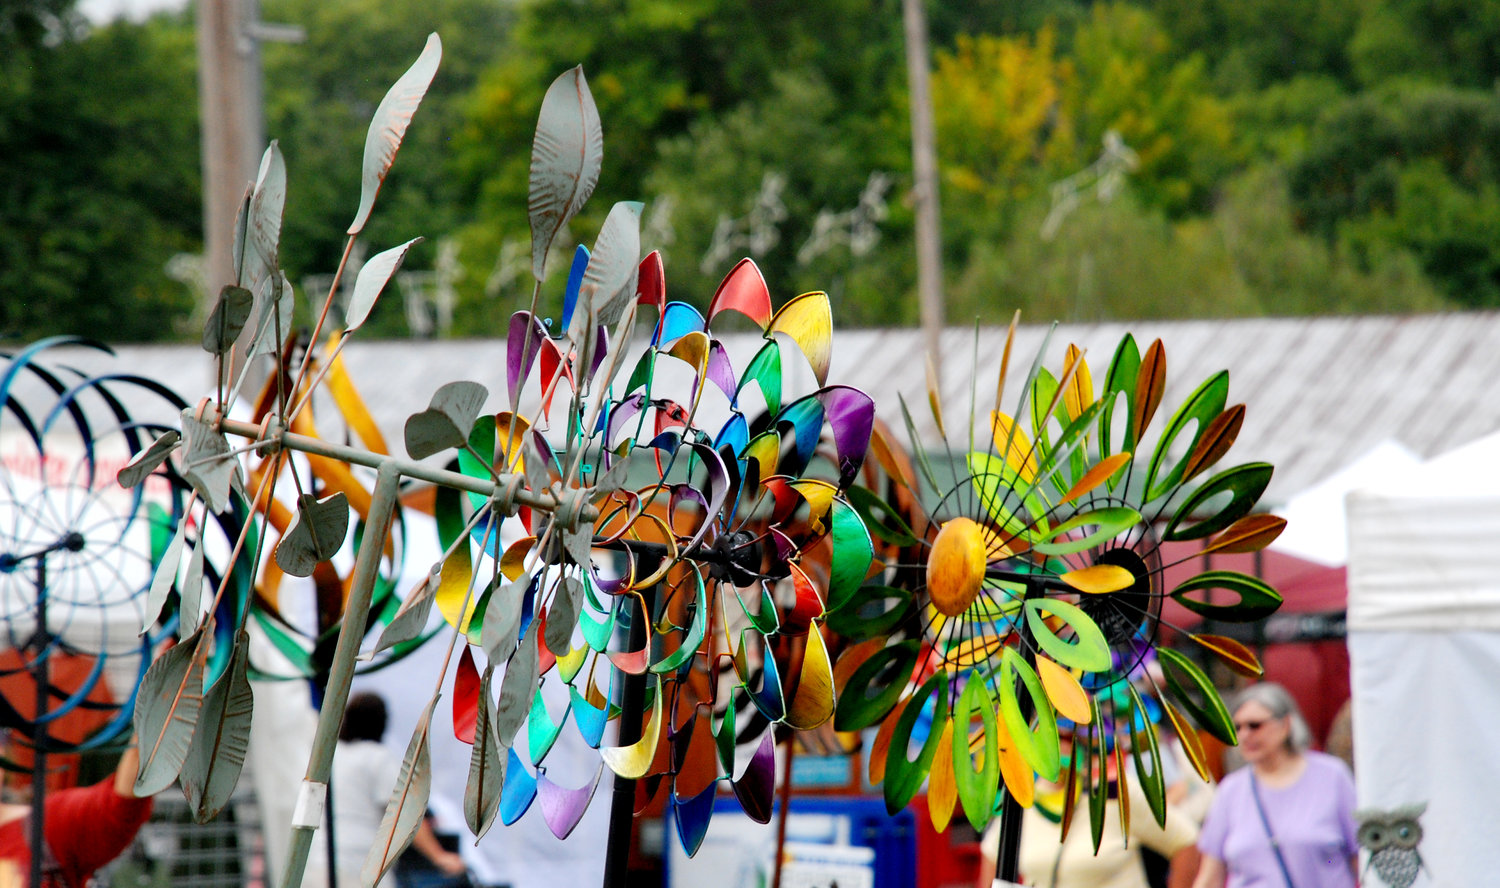 THE OZARK UTOPIA CLUB began helping the Ozark Chamber of Commerce with the yearly craft fair at Finley River Park in 1974, and has since assumed control of the event as its key fundraiser.